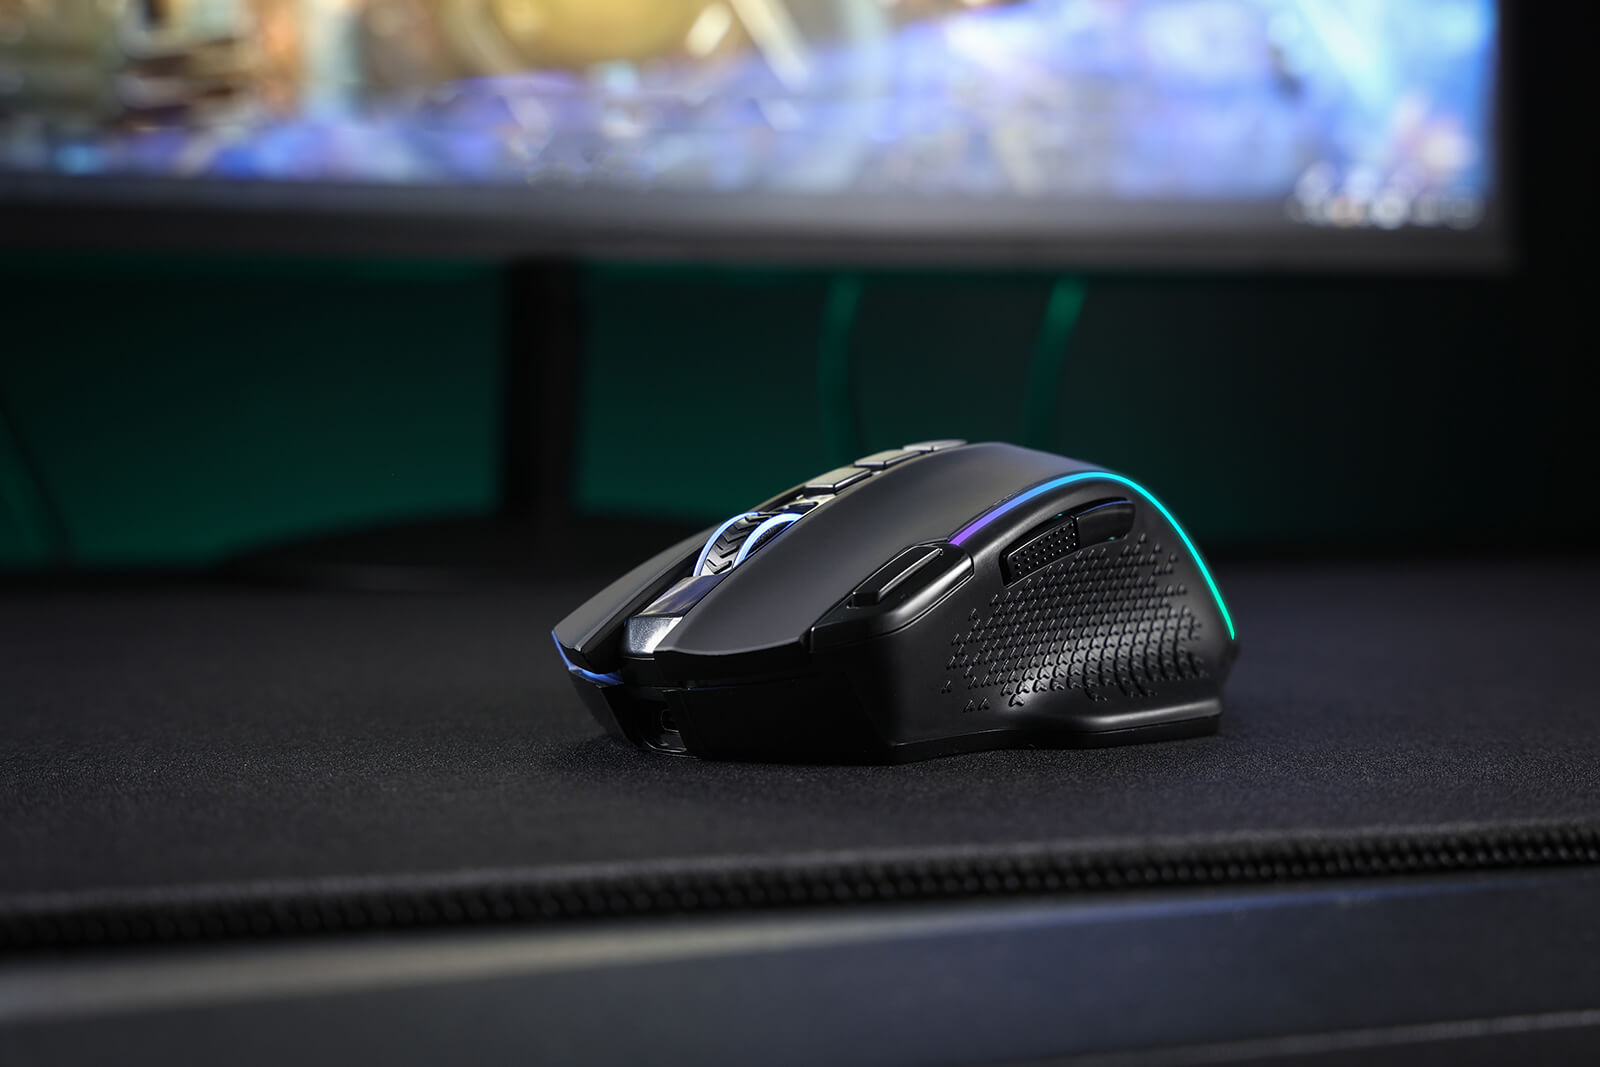 FPS gaming mouse